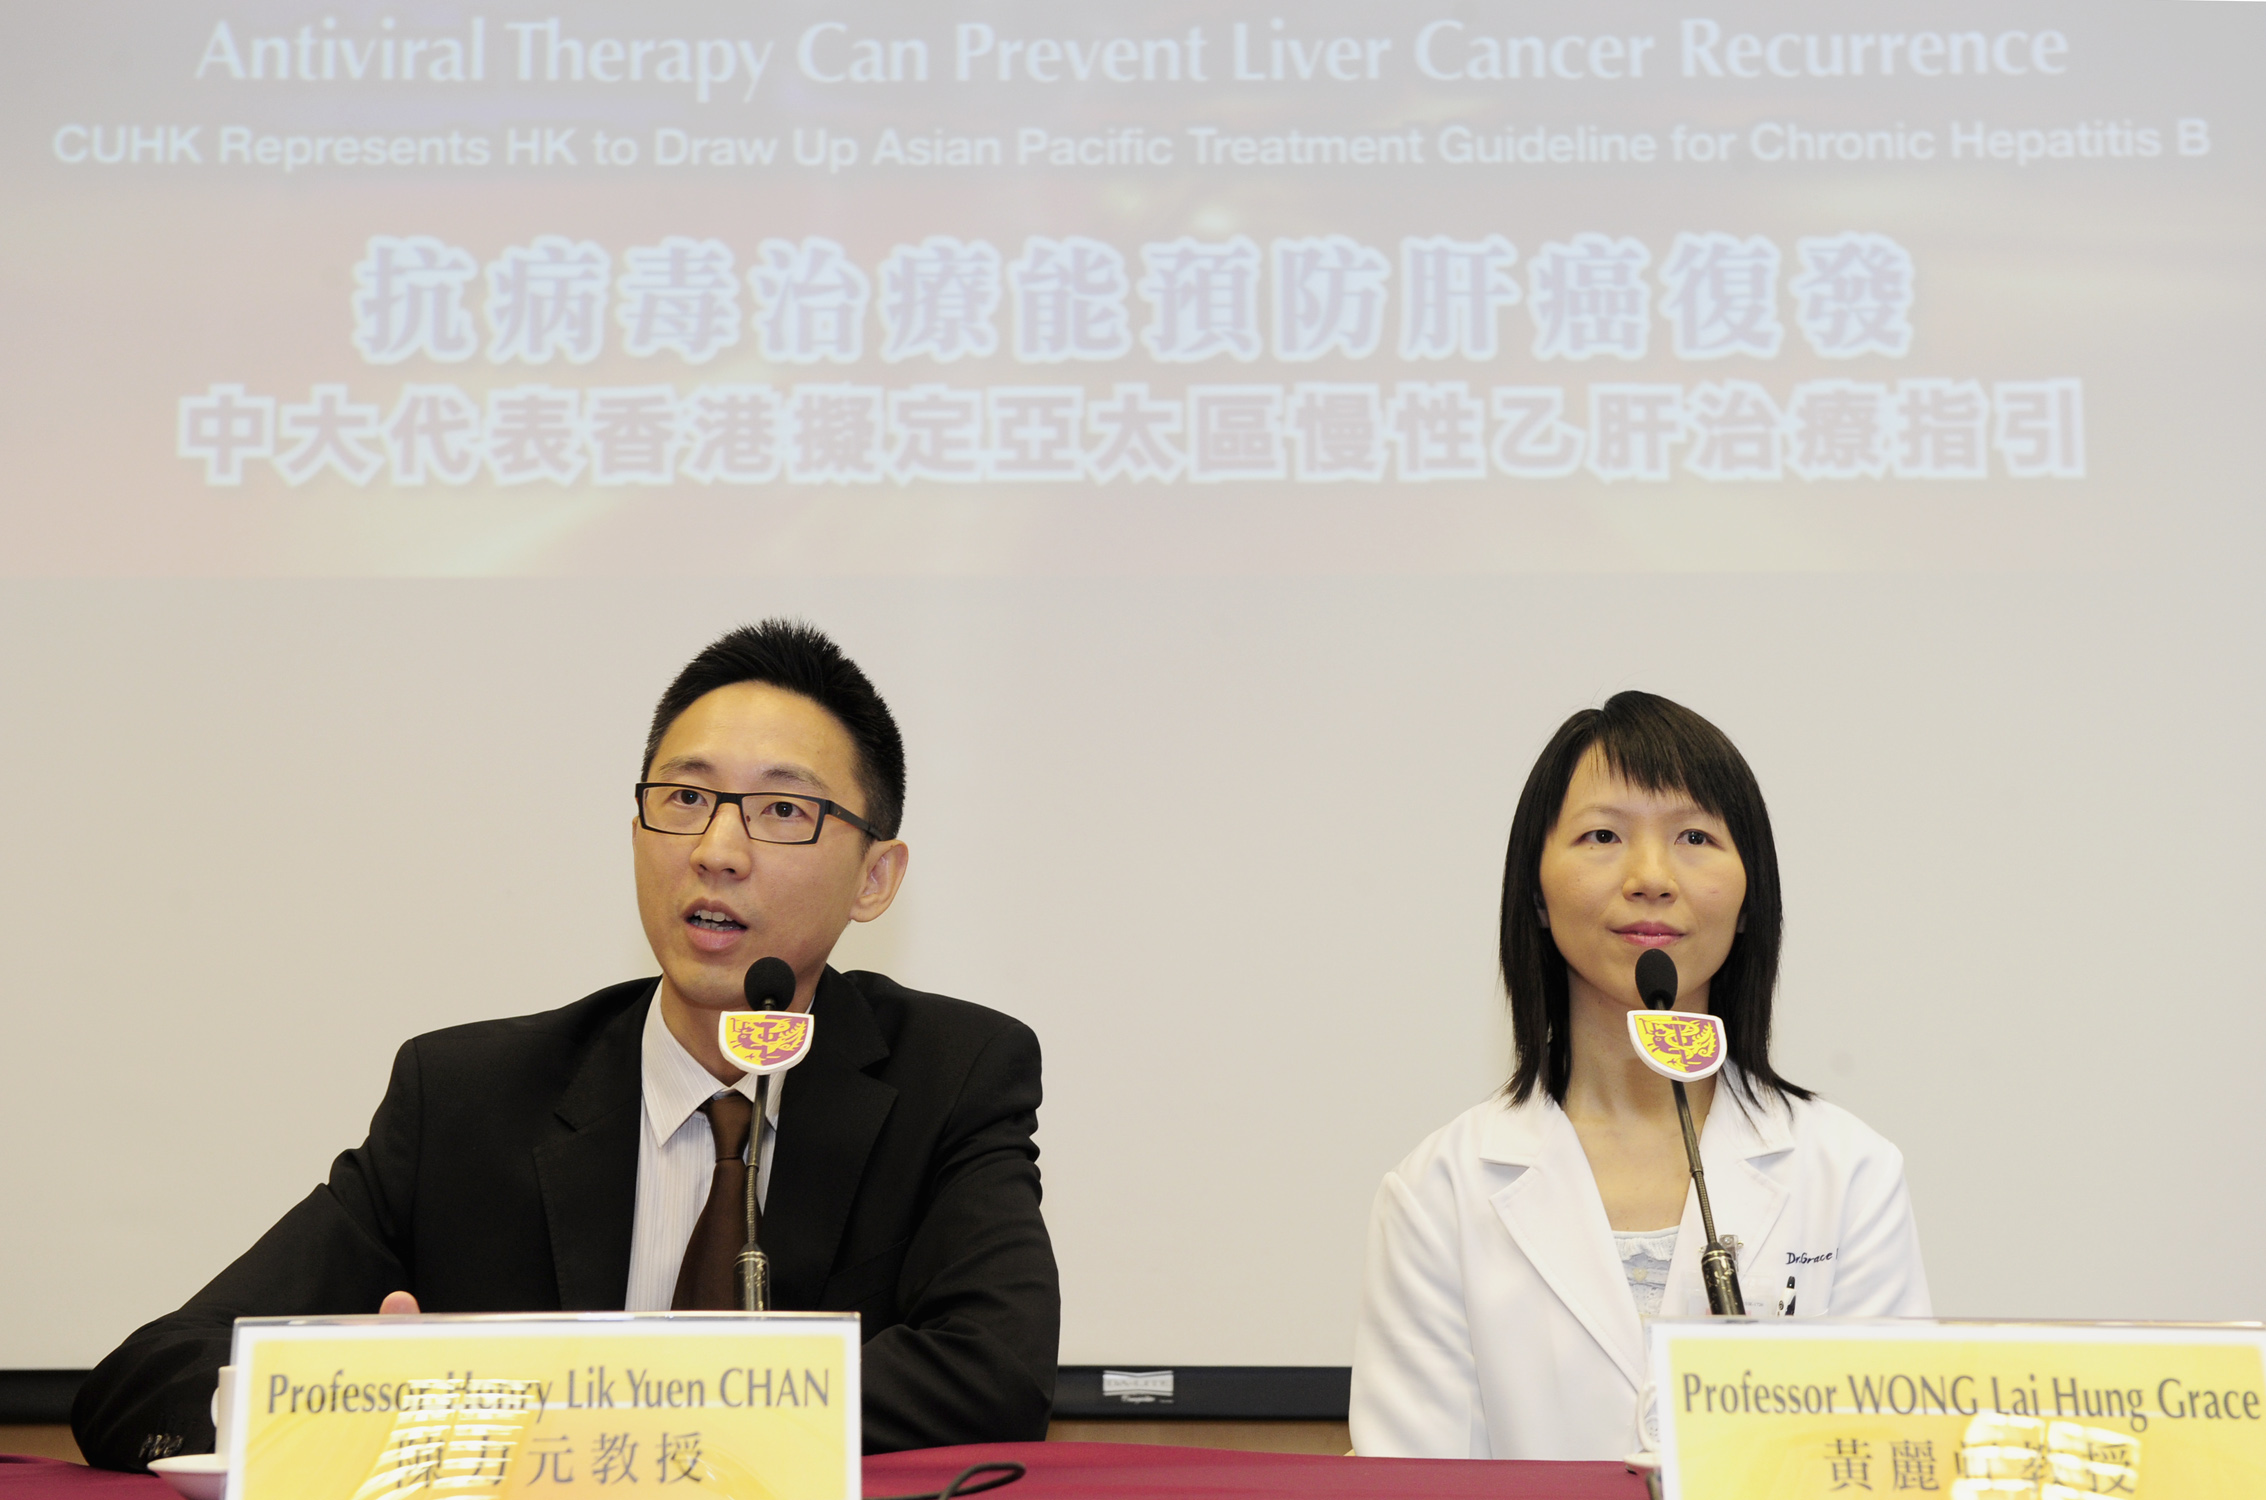 From left: Prof. Henry Lik Yuen CHAN, Professor, Department of Medicine and Therapeutics and Director of Center for Liver Health; and Prof. Grace Lai Hung WONG, Associate Professor, Department of Medicine and Therapeutics at CUHK present their recent meta-analysis, which reveals that antiviral treatment was associated with risk reduction for Hepatocellular carcinoma (HCC) recurrence in chronic hepatitis B patients who have HCC resected or treated by loco-regional therapy